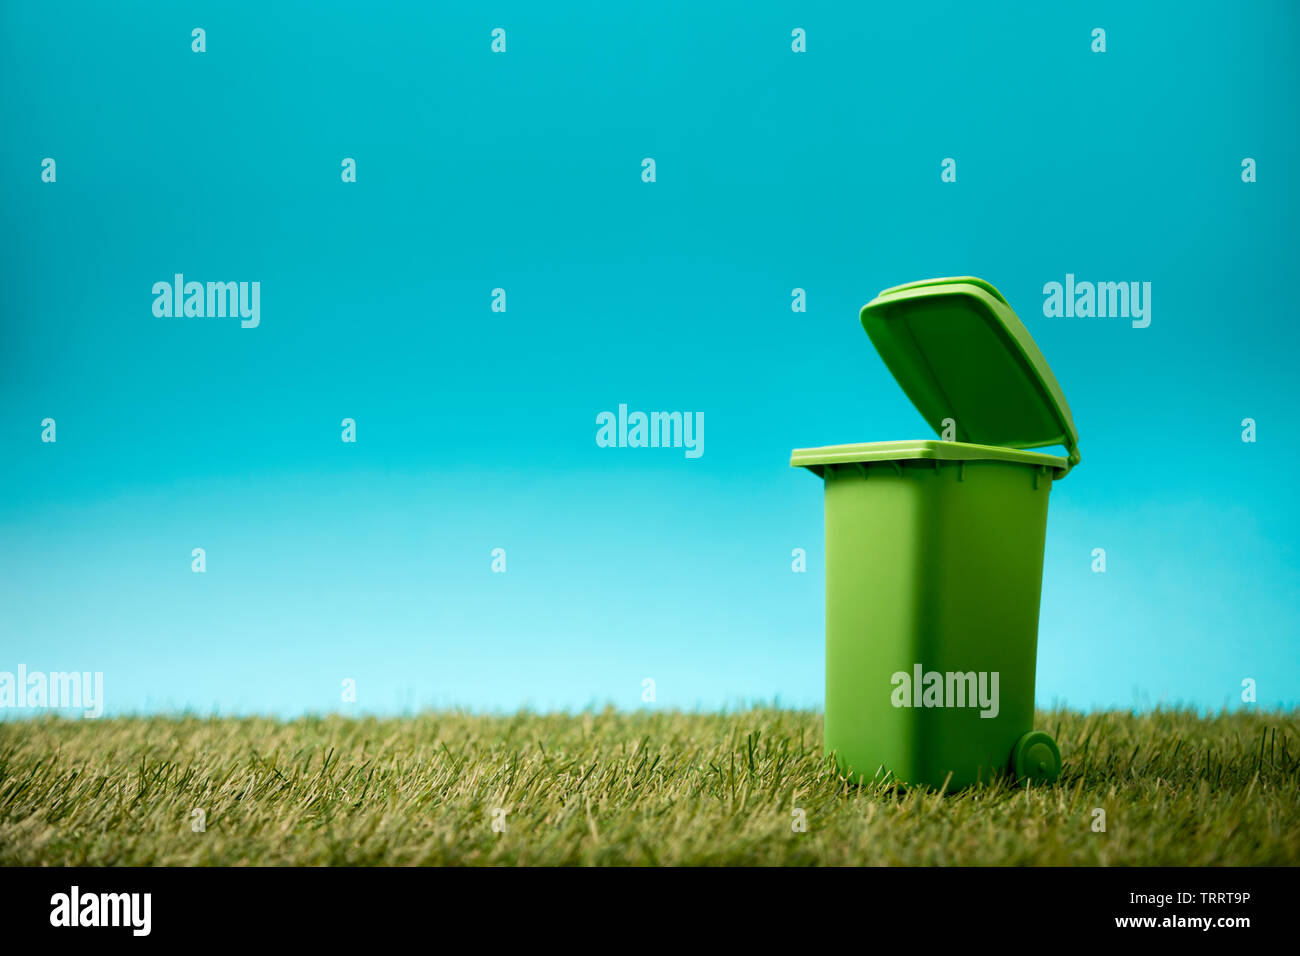 Green recycle bin on green grass and blue sky Stock Photo